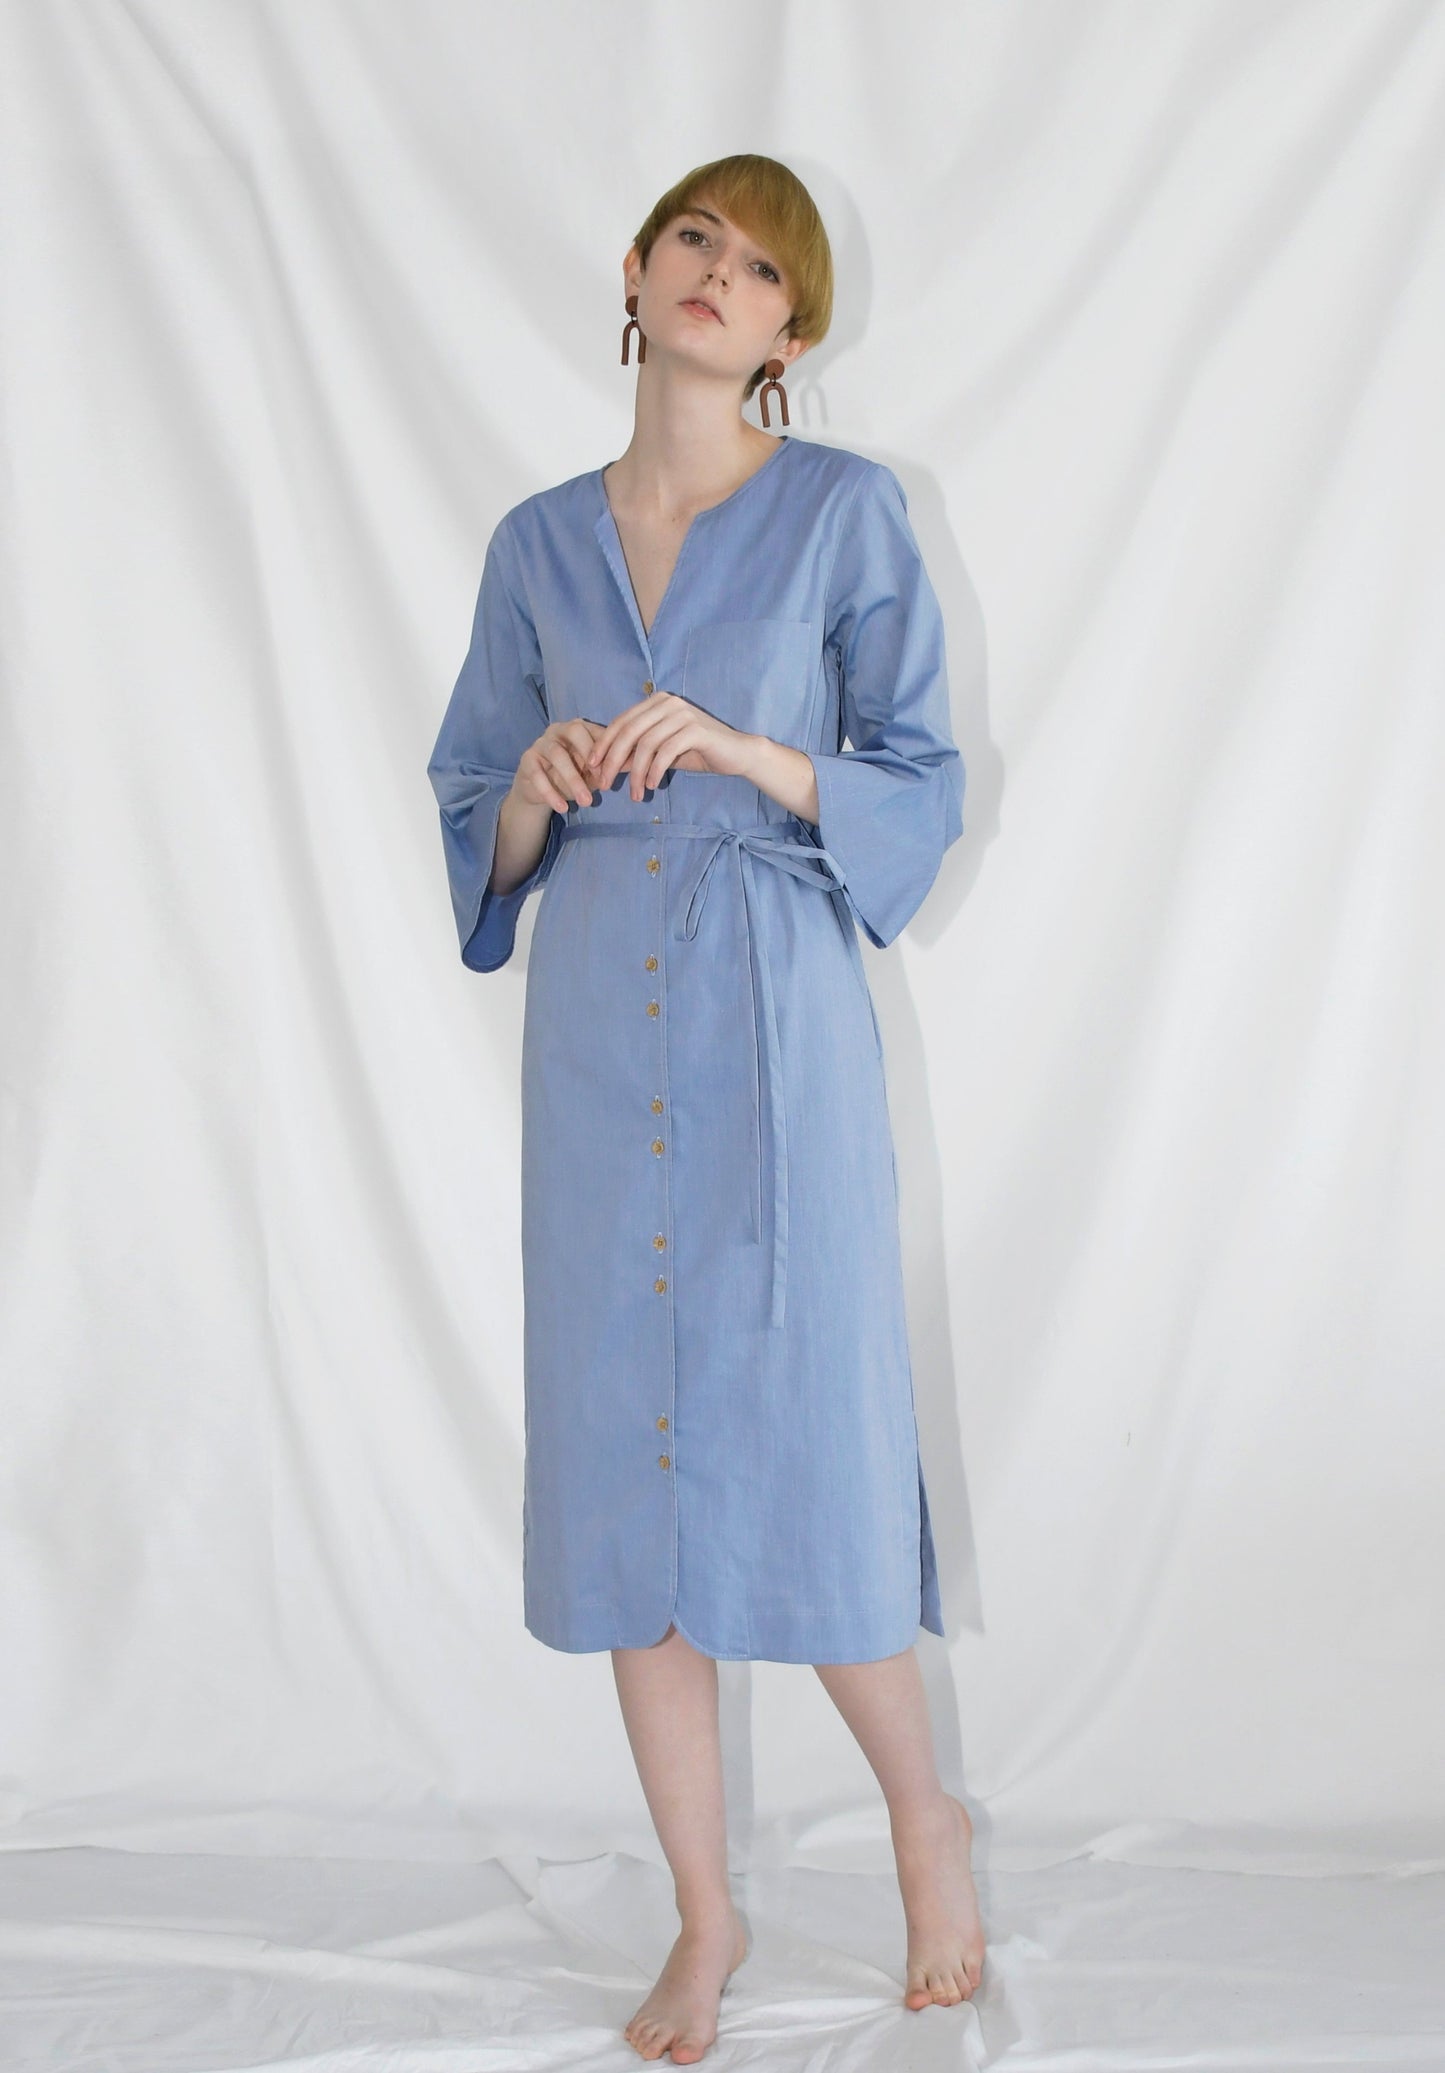 Gentle Slopes Dress / Blue Chambray